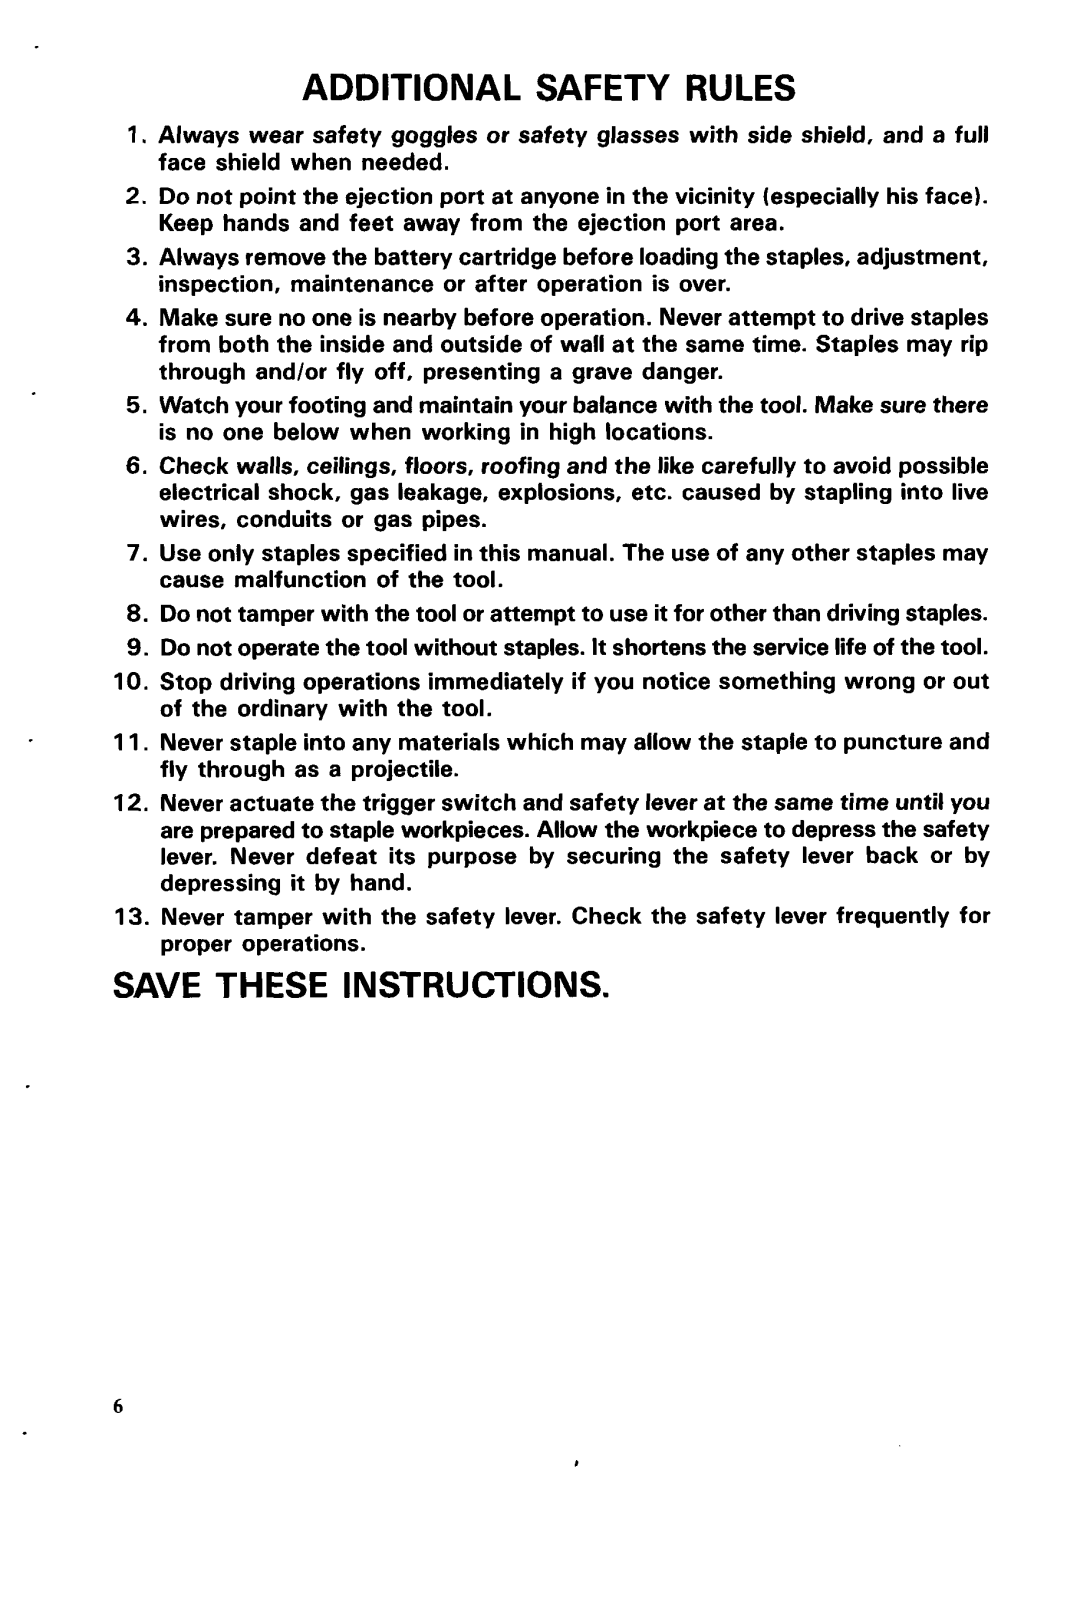 Makita Model T220DW instruction manual Additional Safety Rules, Save These Instructions 